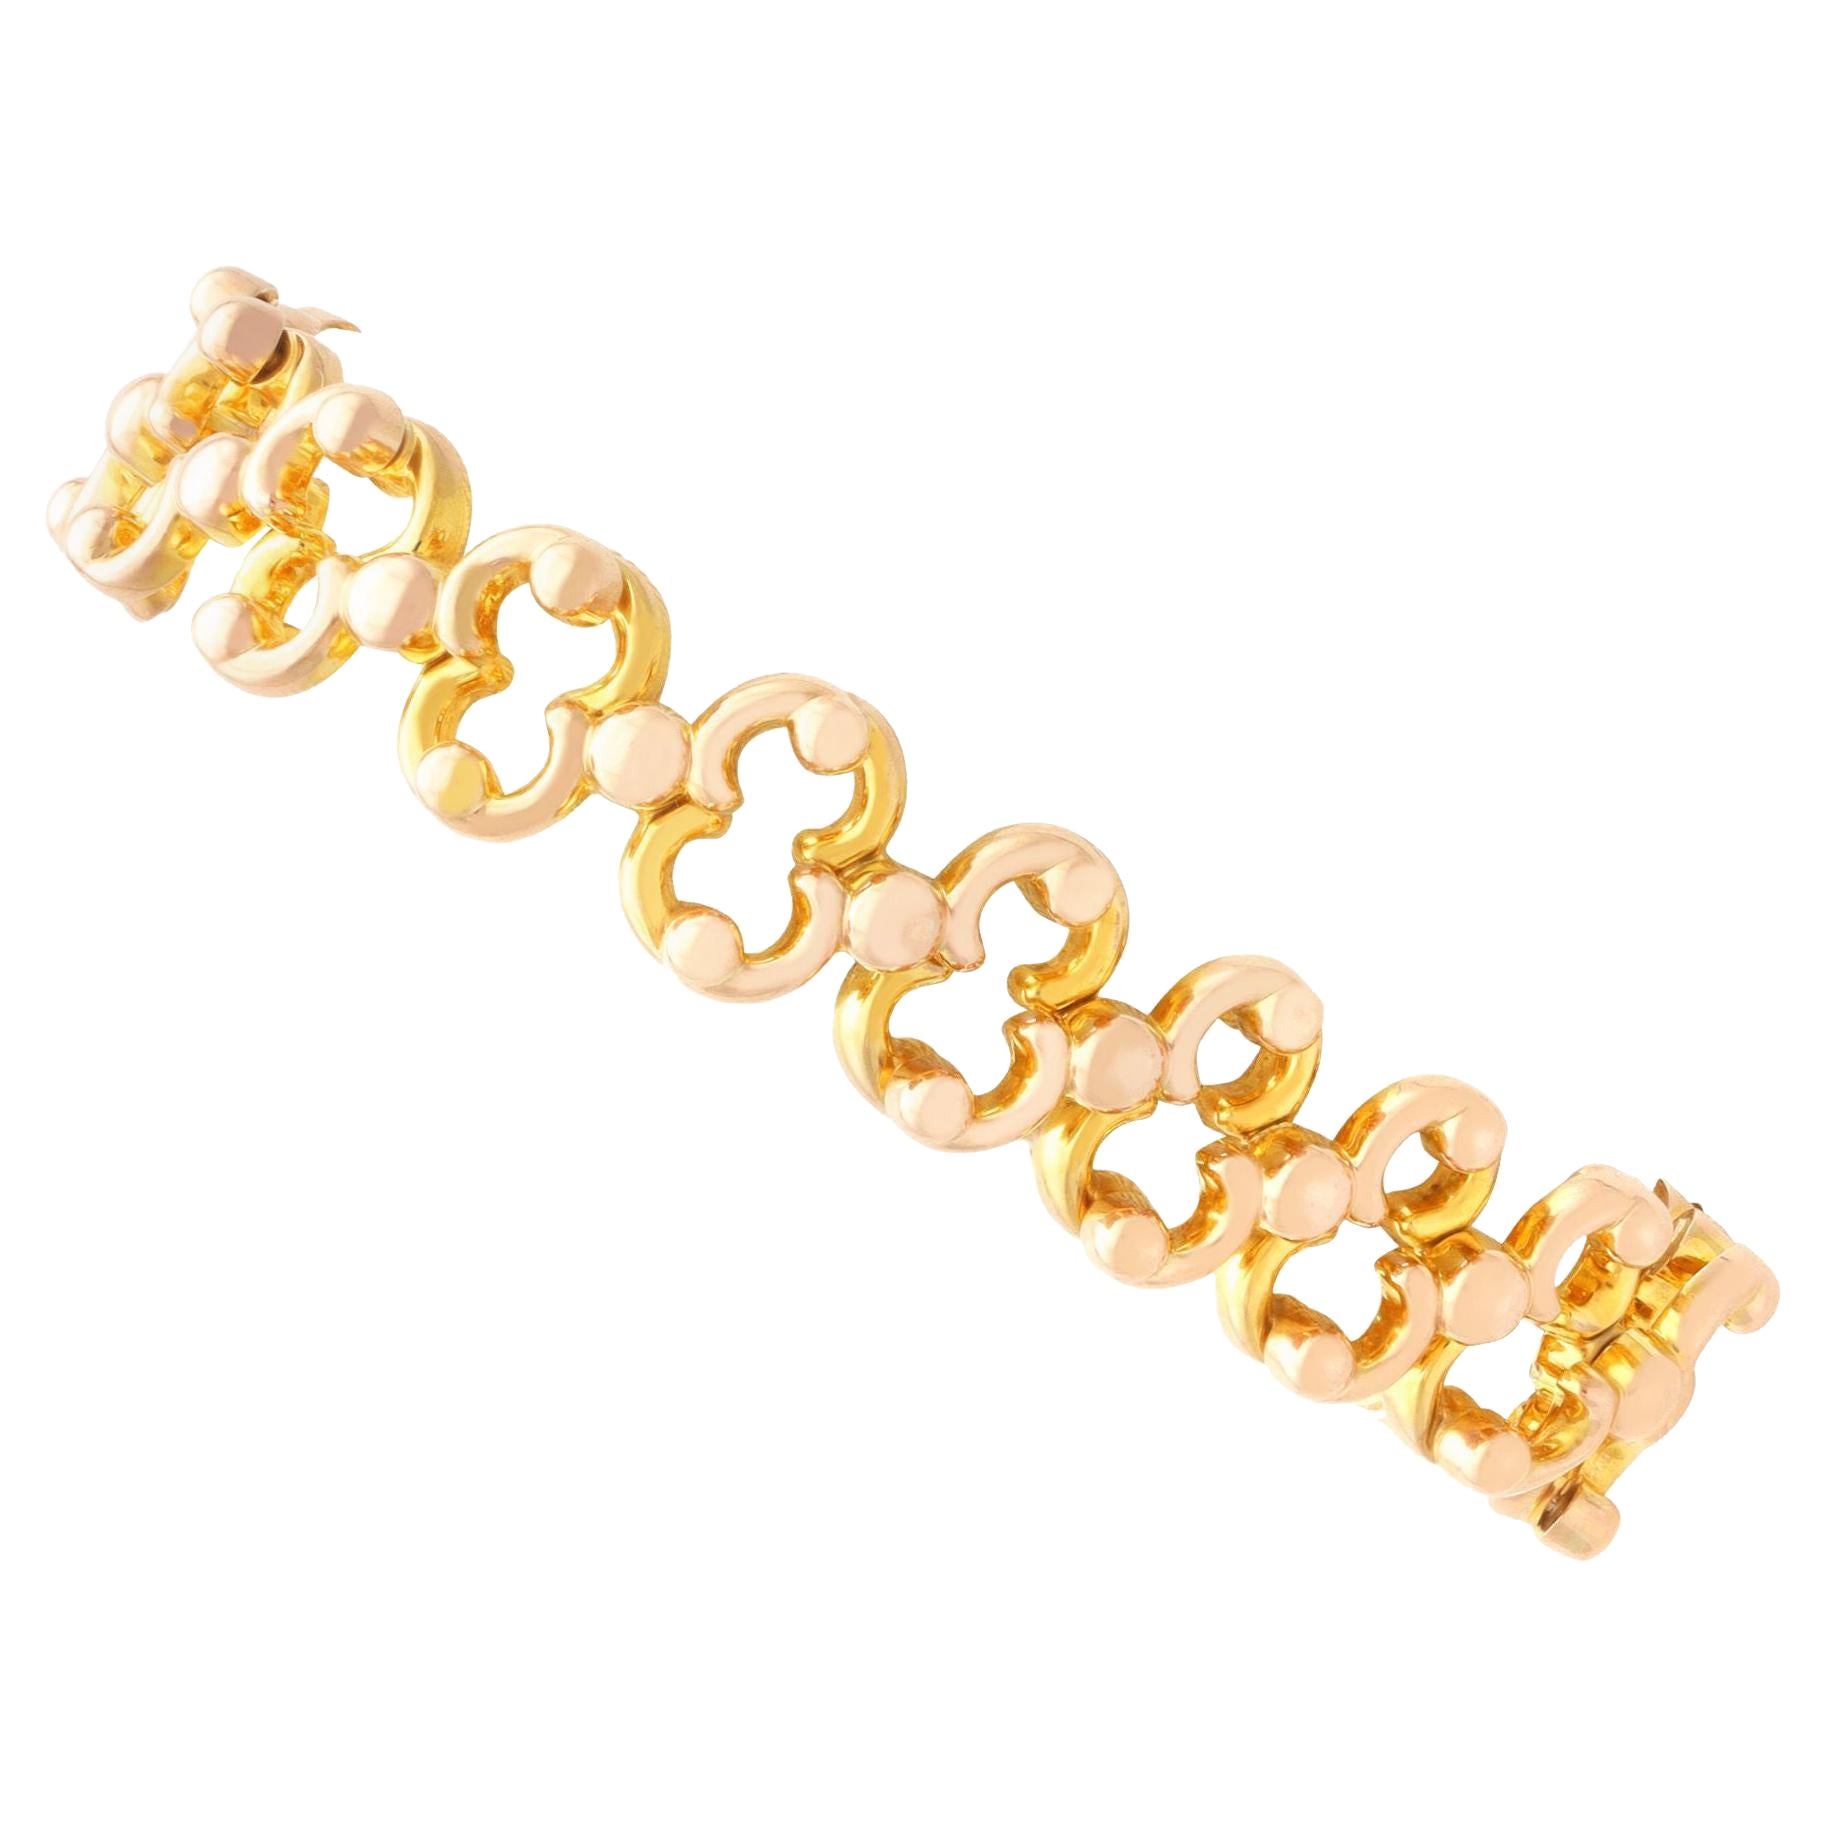 Antique Yellow and Rose Gold Expandable Bracelet